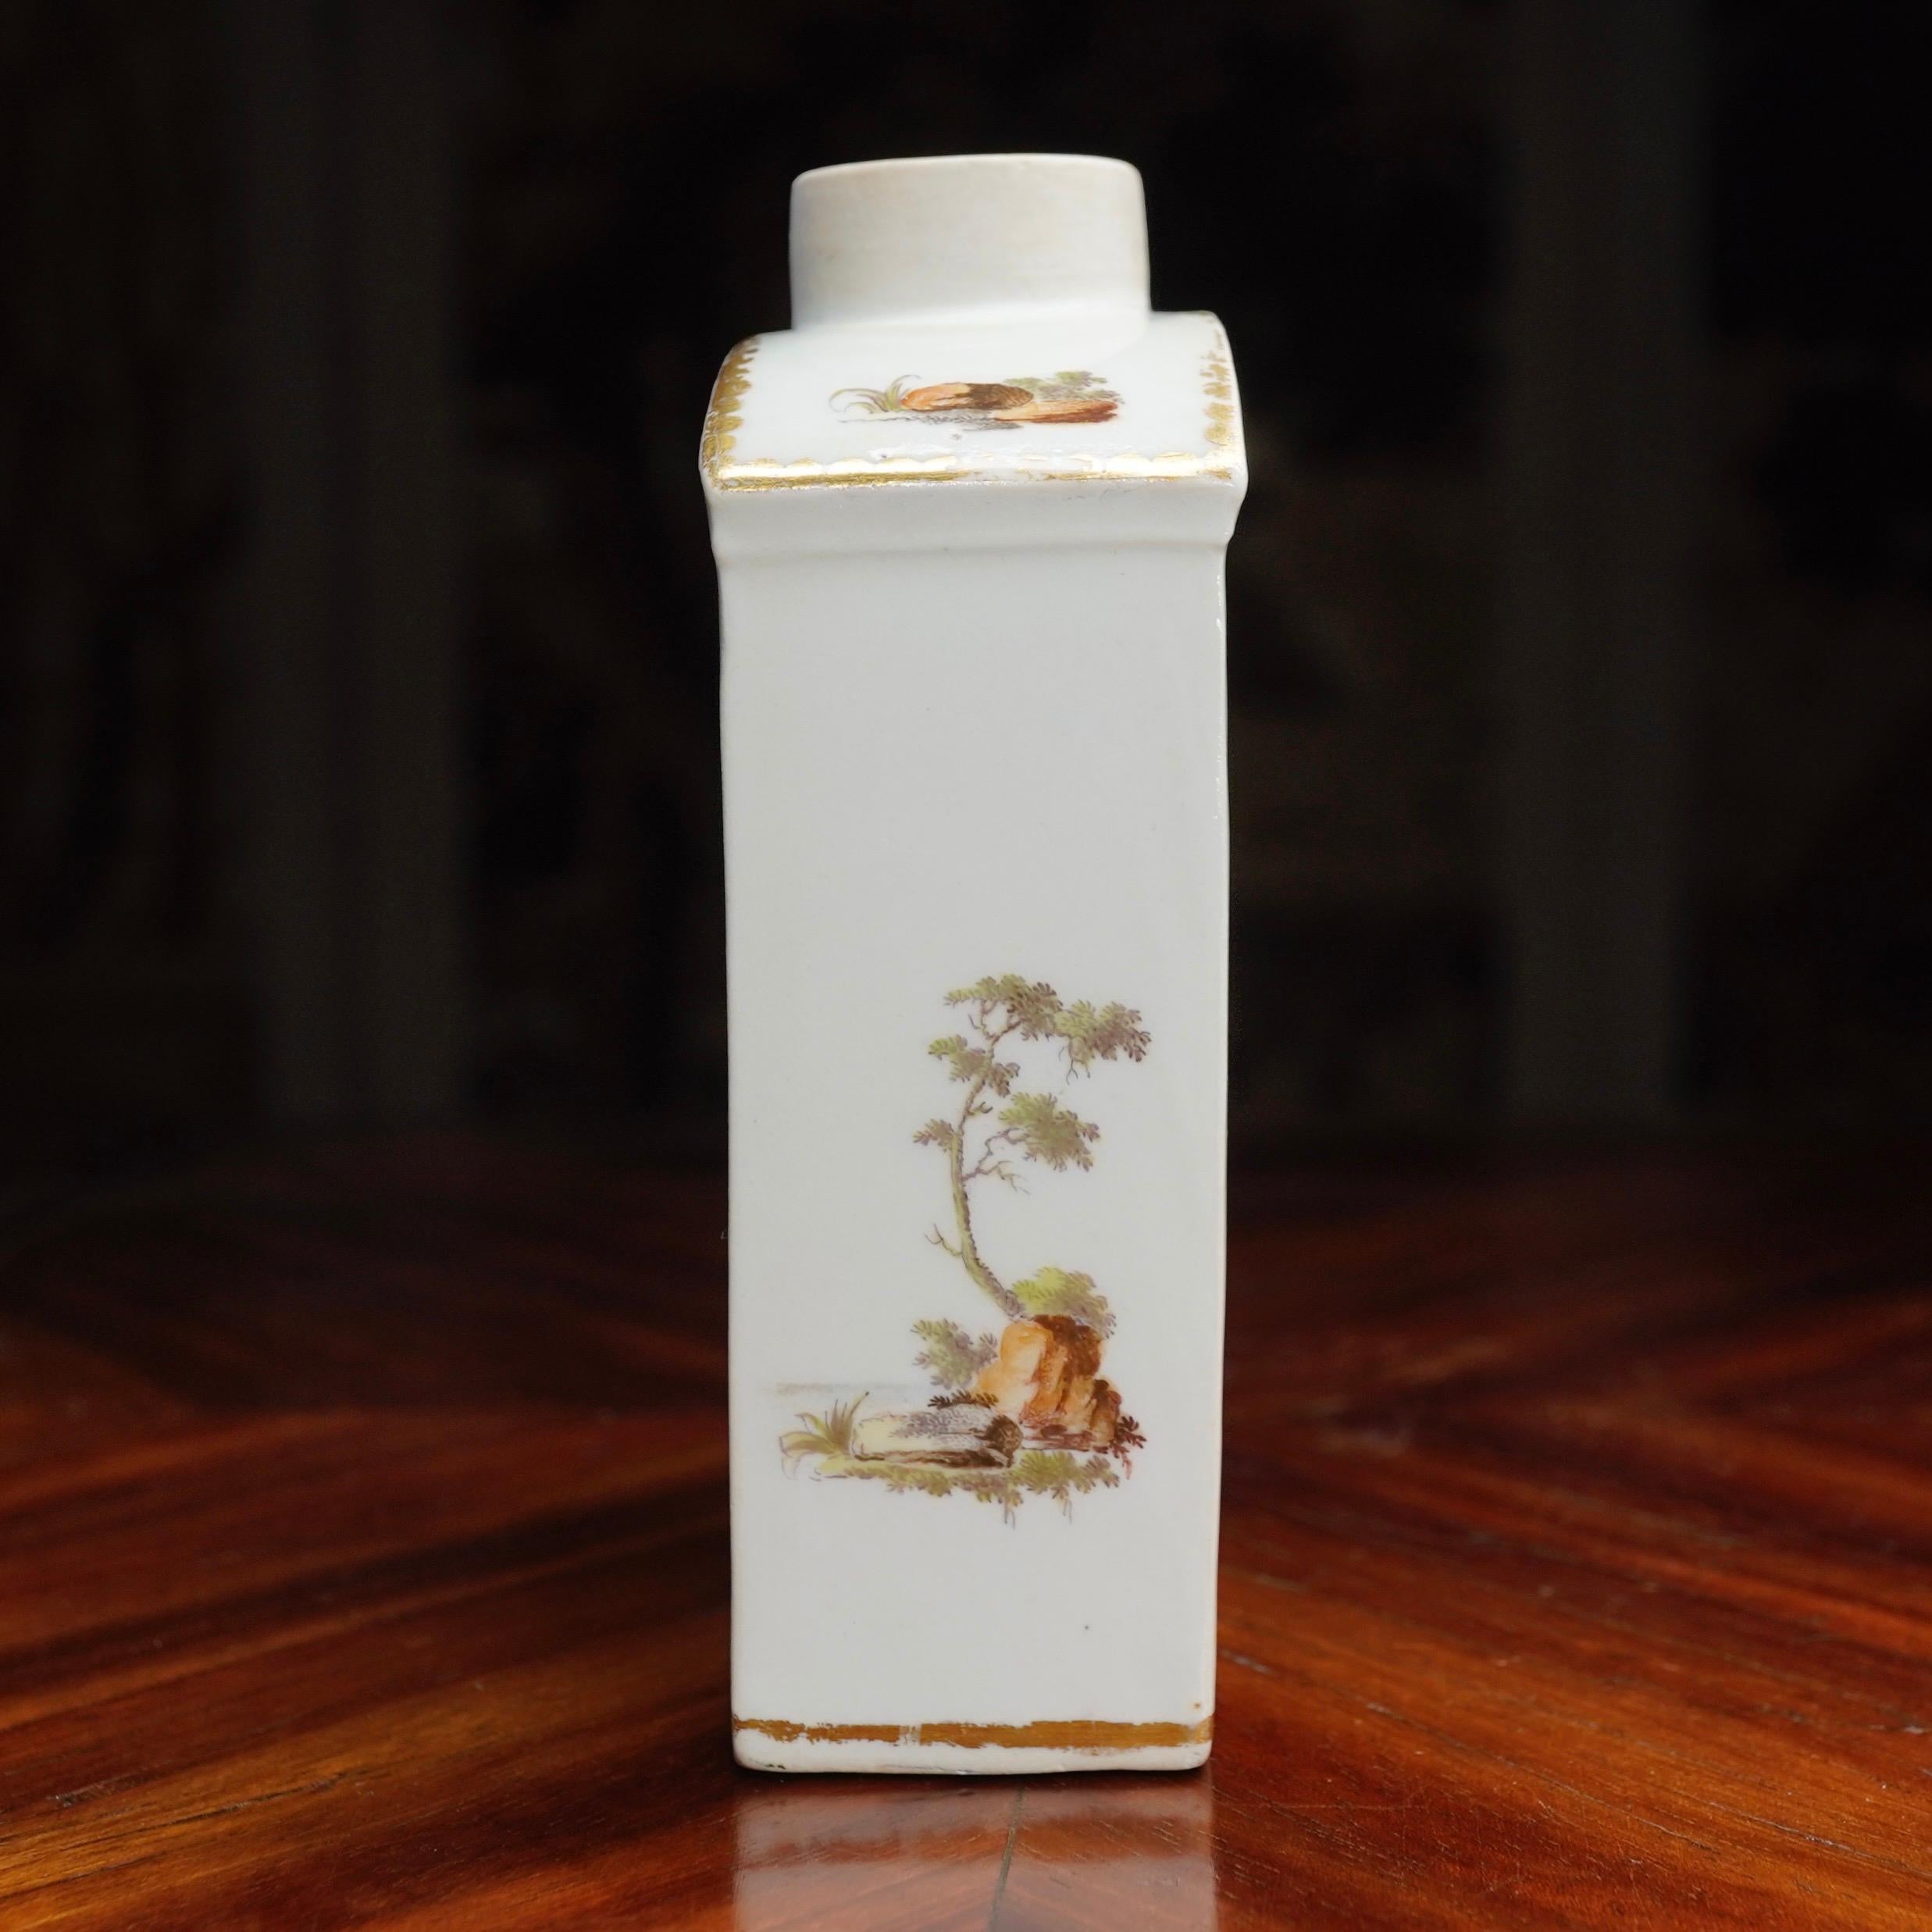 Rococo Zurich Swiss Porcelain Tea Canister, Finely Painted Landscapes, circa 1775 For Sale